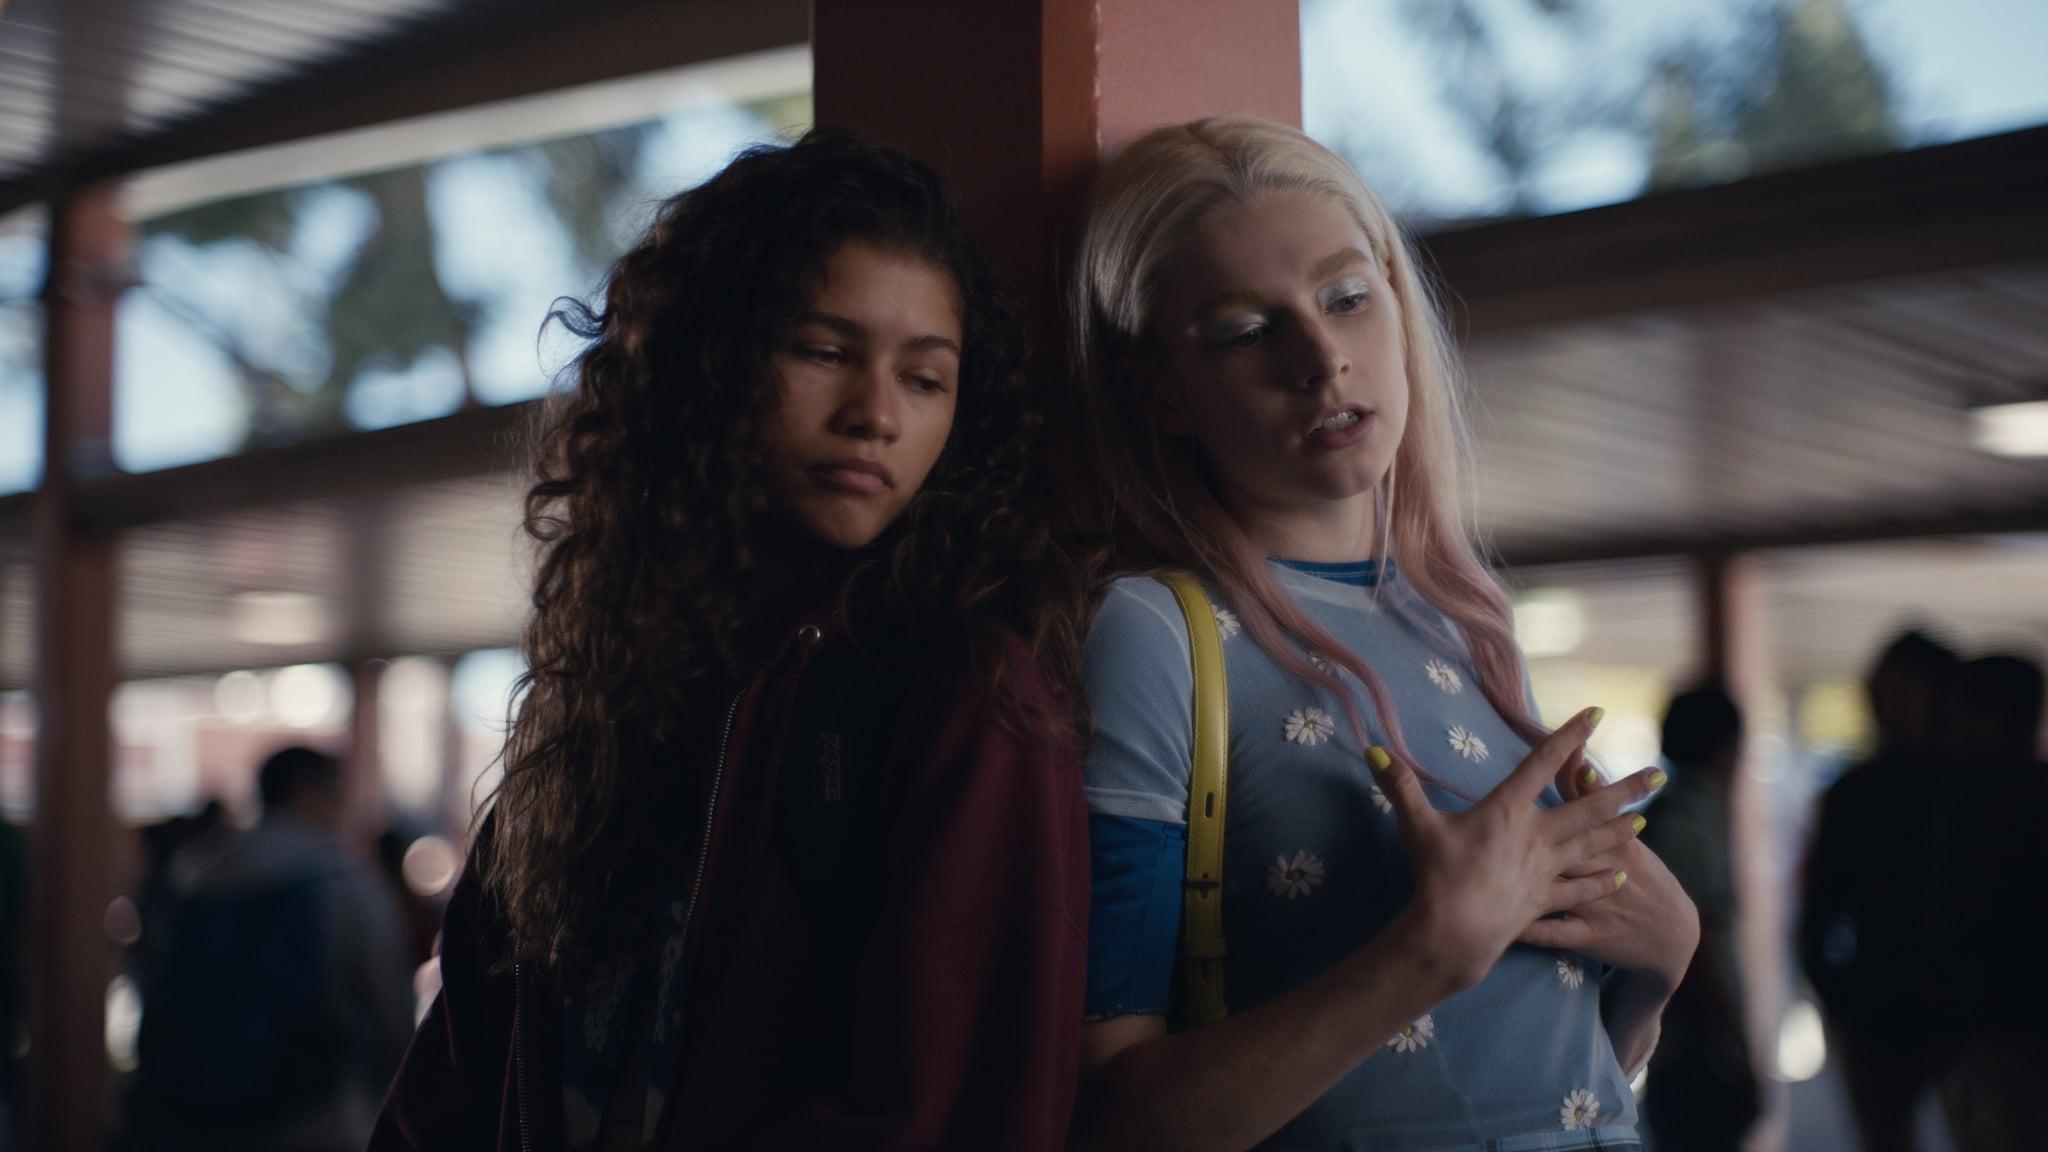 Will There Be a Season 2 of Euphoria?